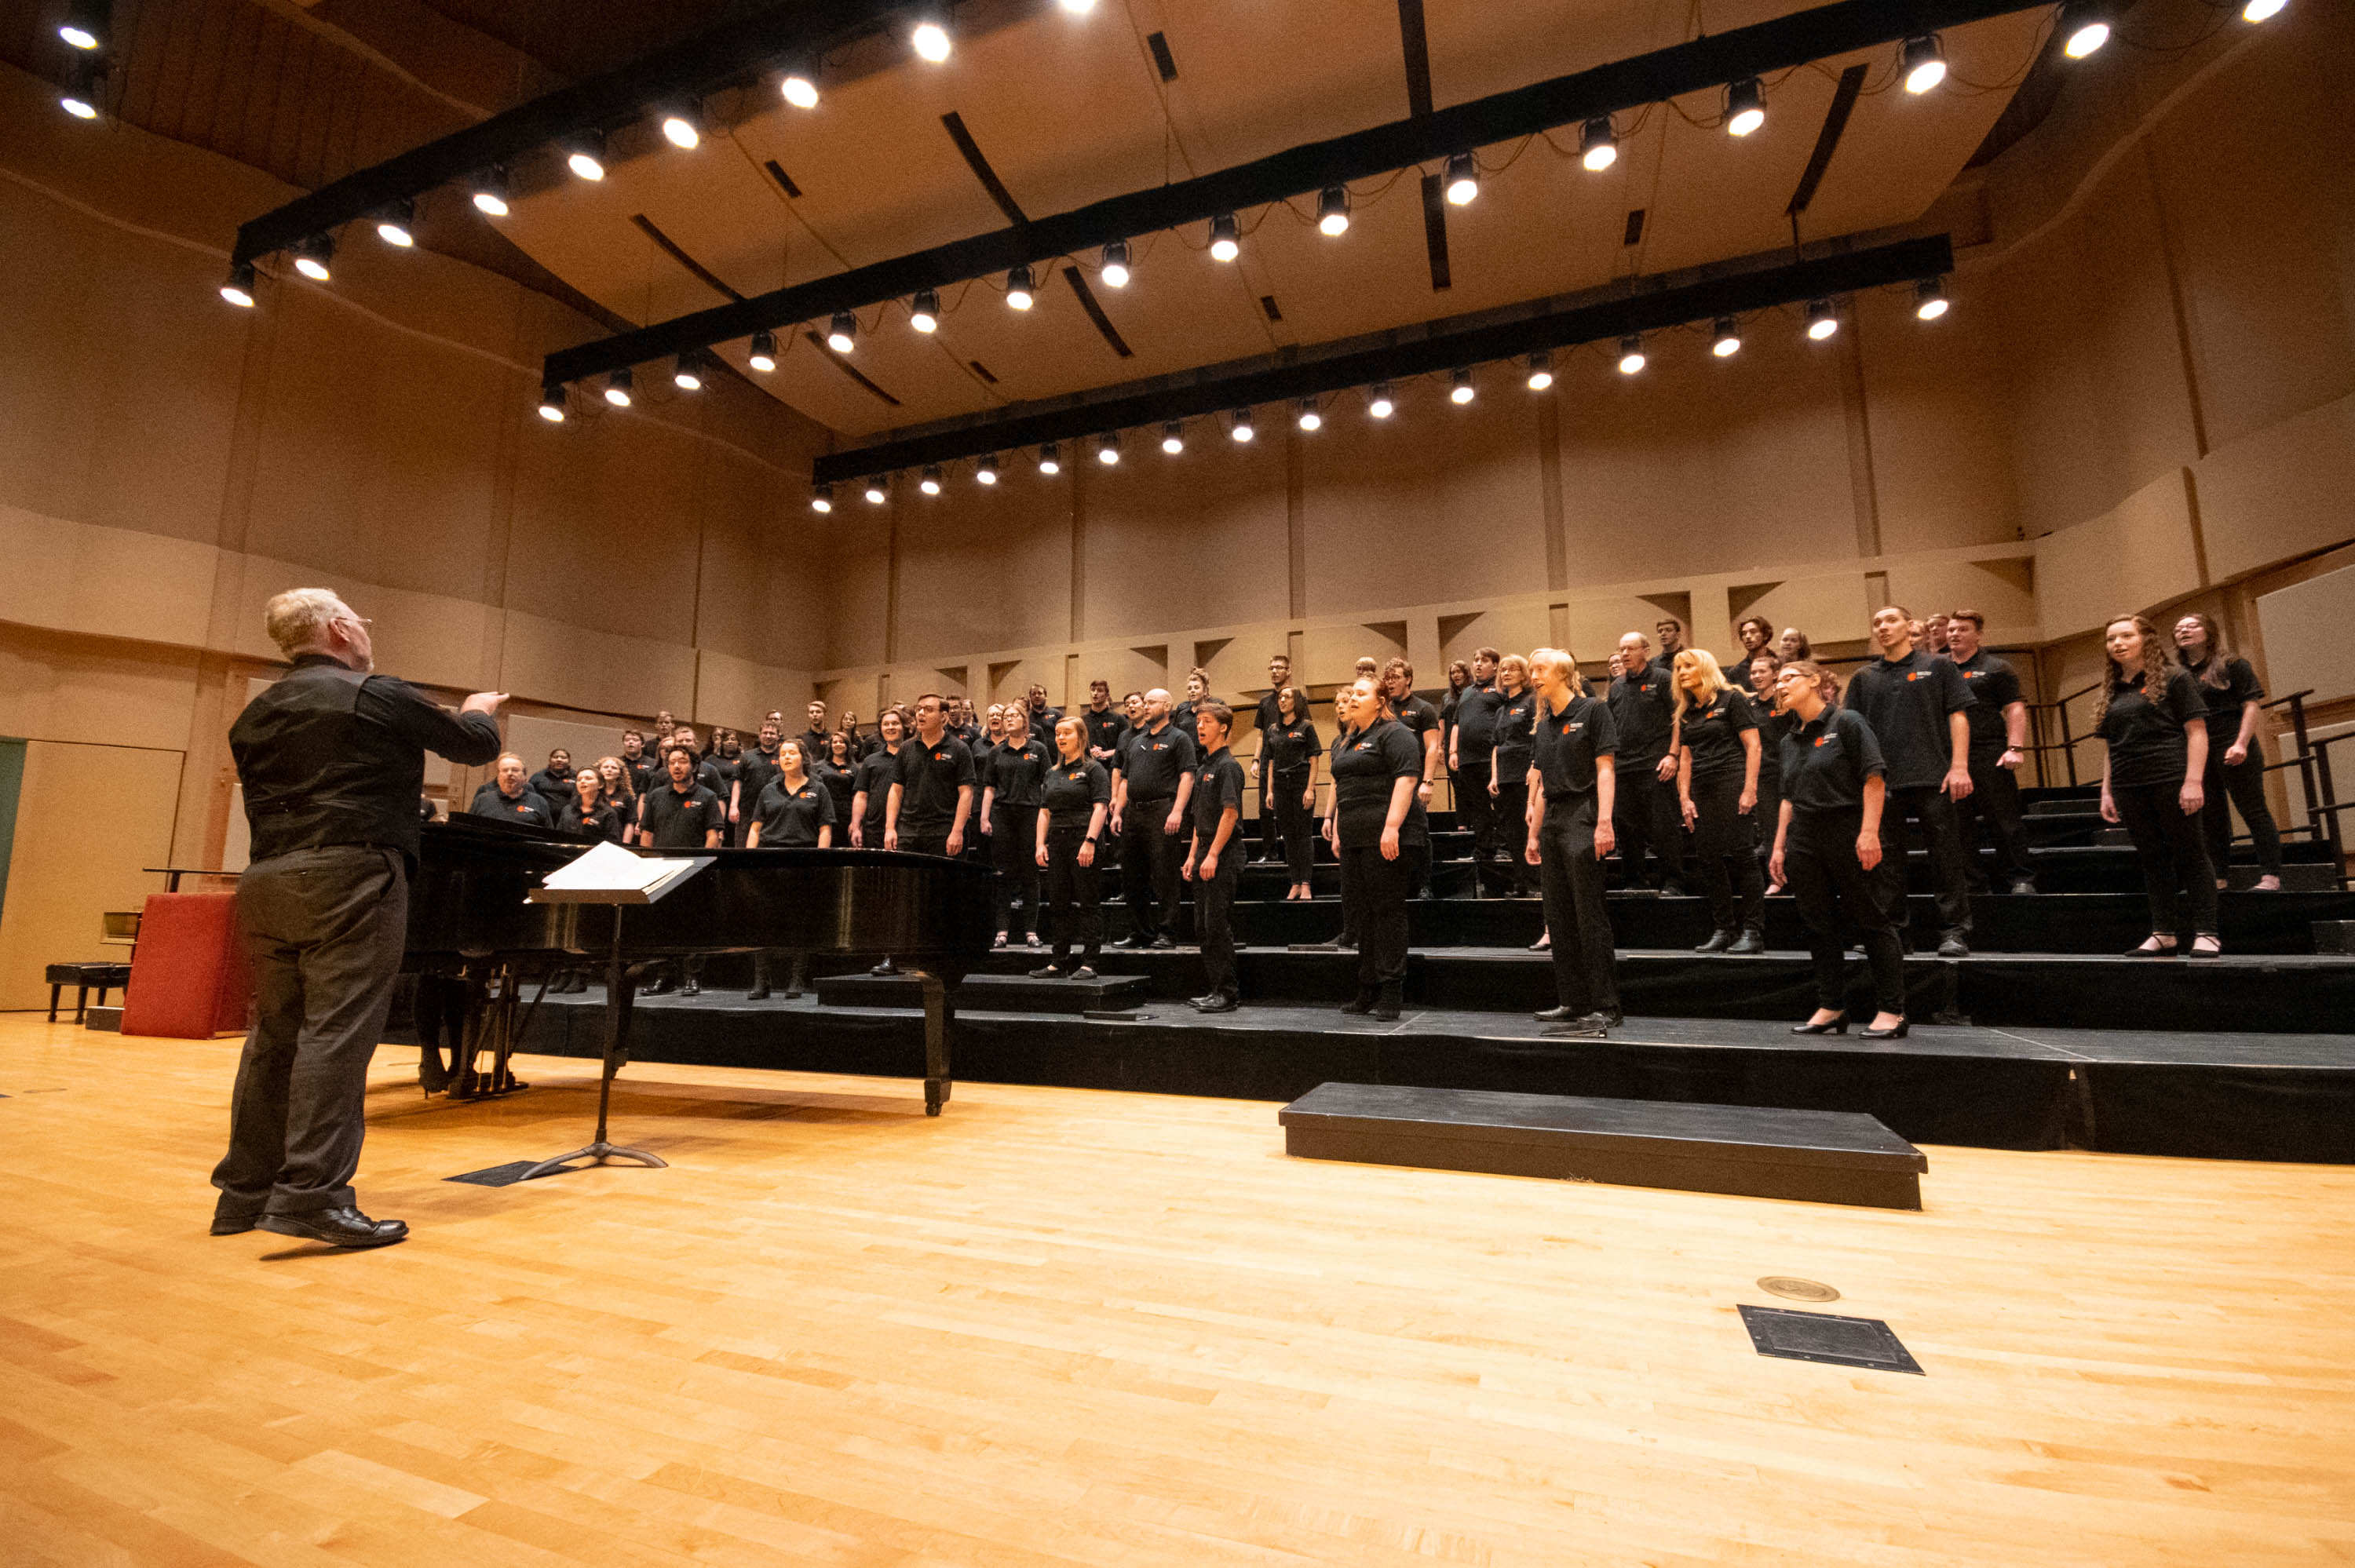 The ISU choir on stage at the Jensen Grand Concert Hall singing